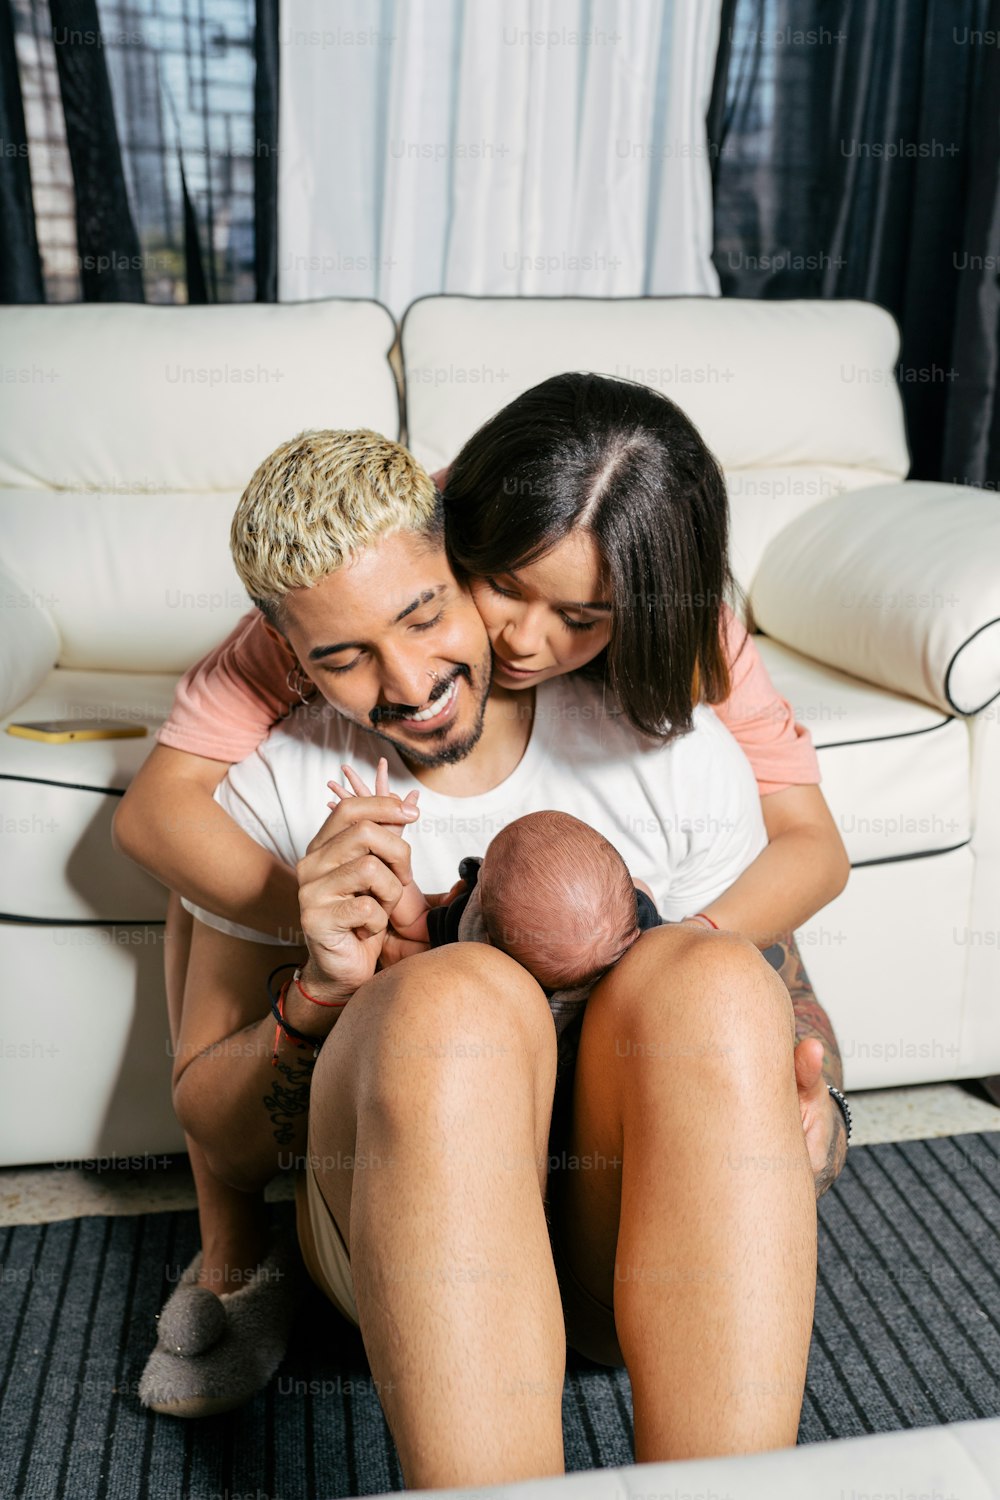 a man and woman sitting on a couch holding a baby